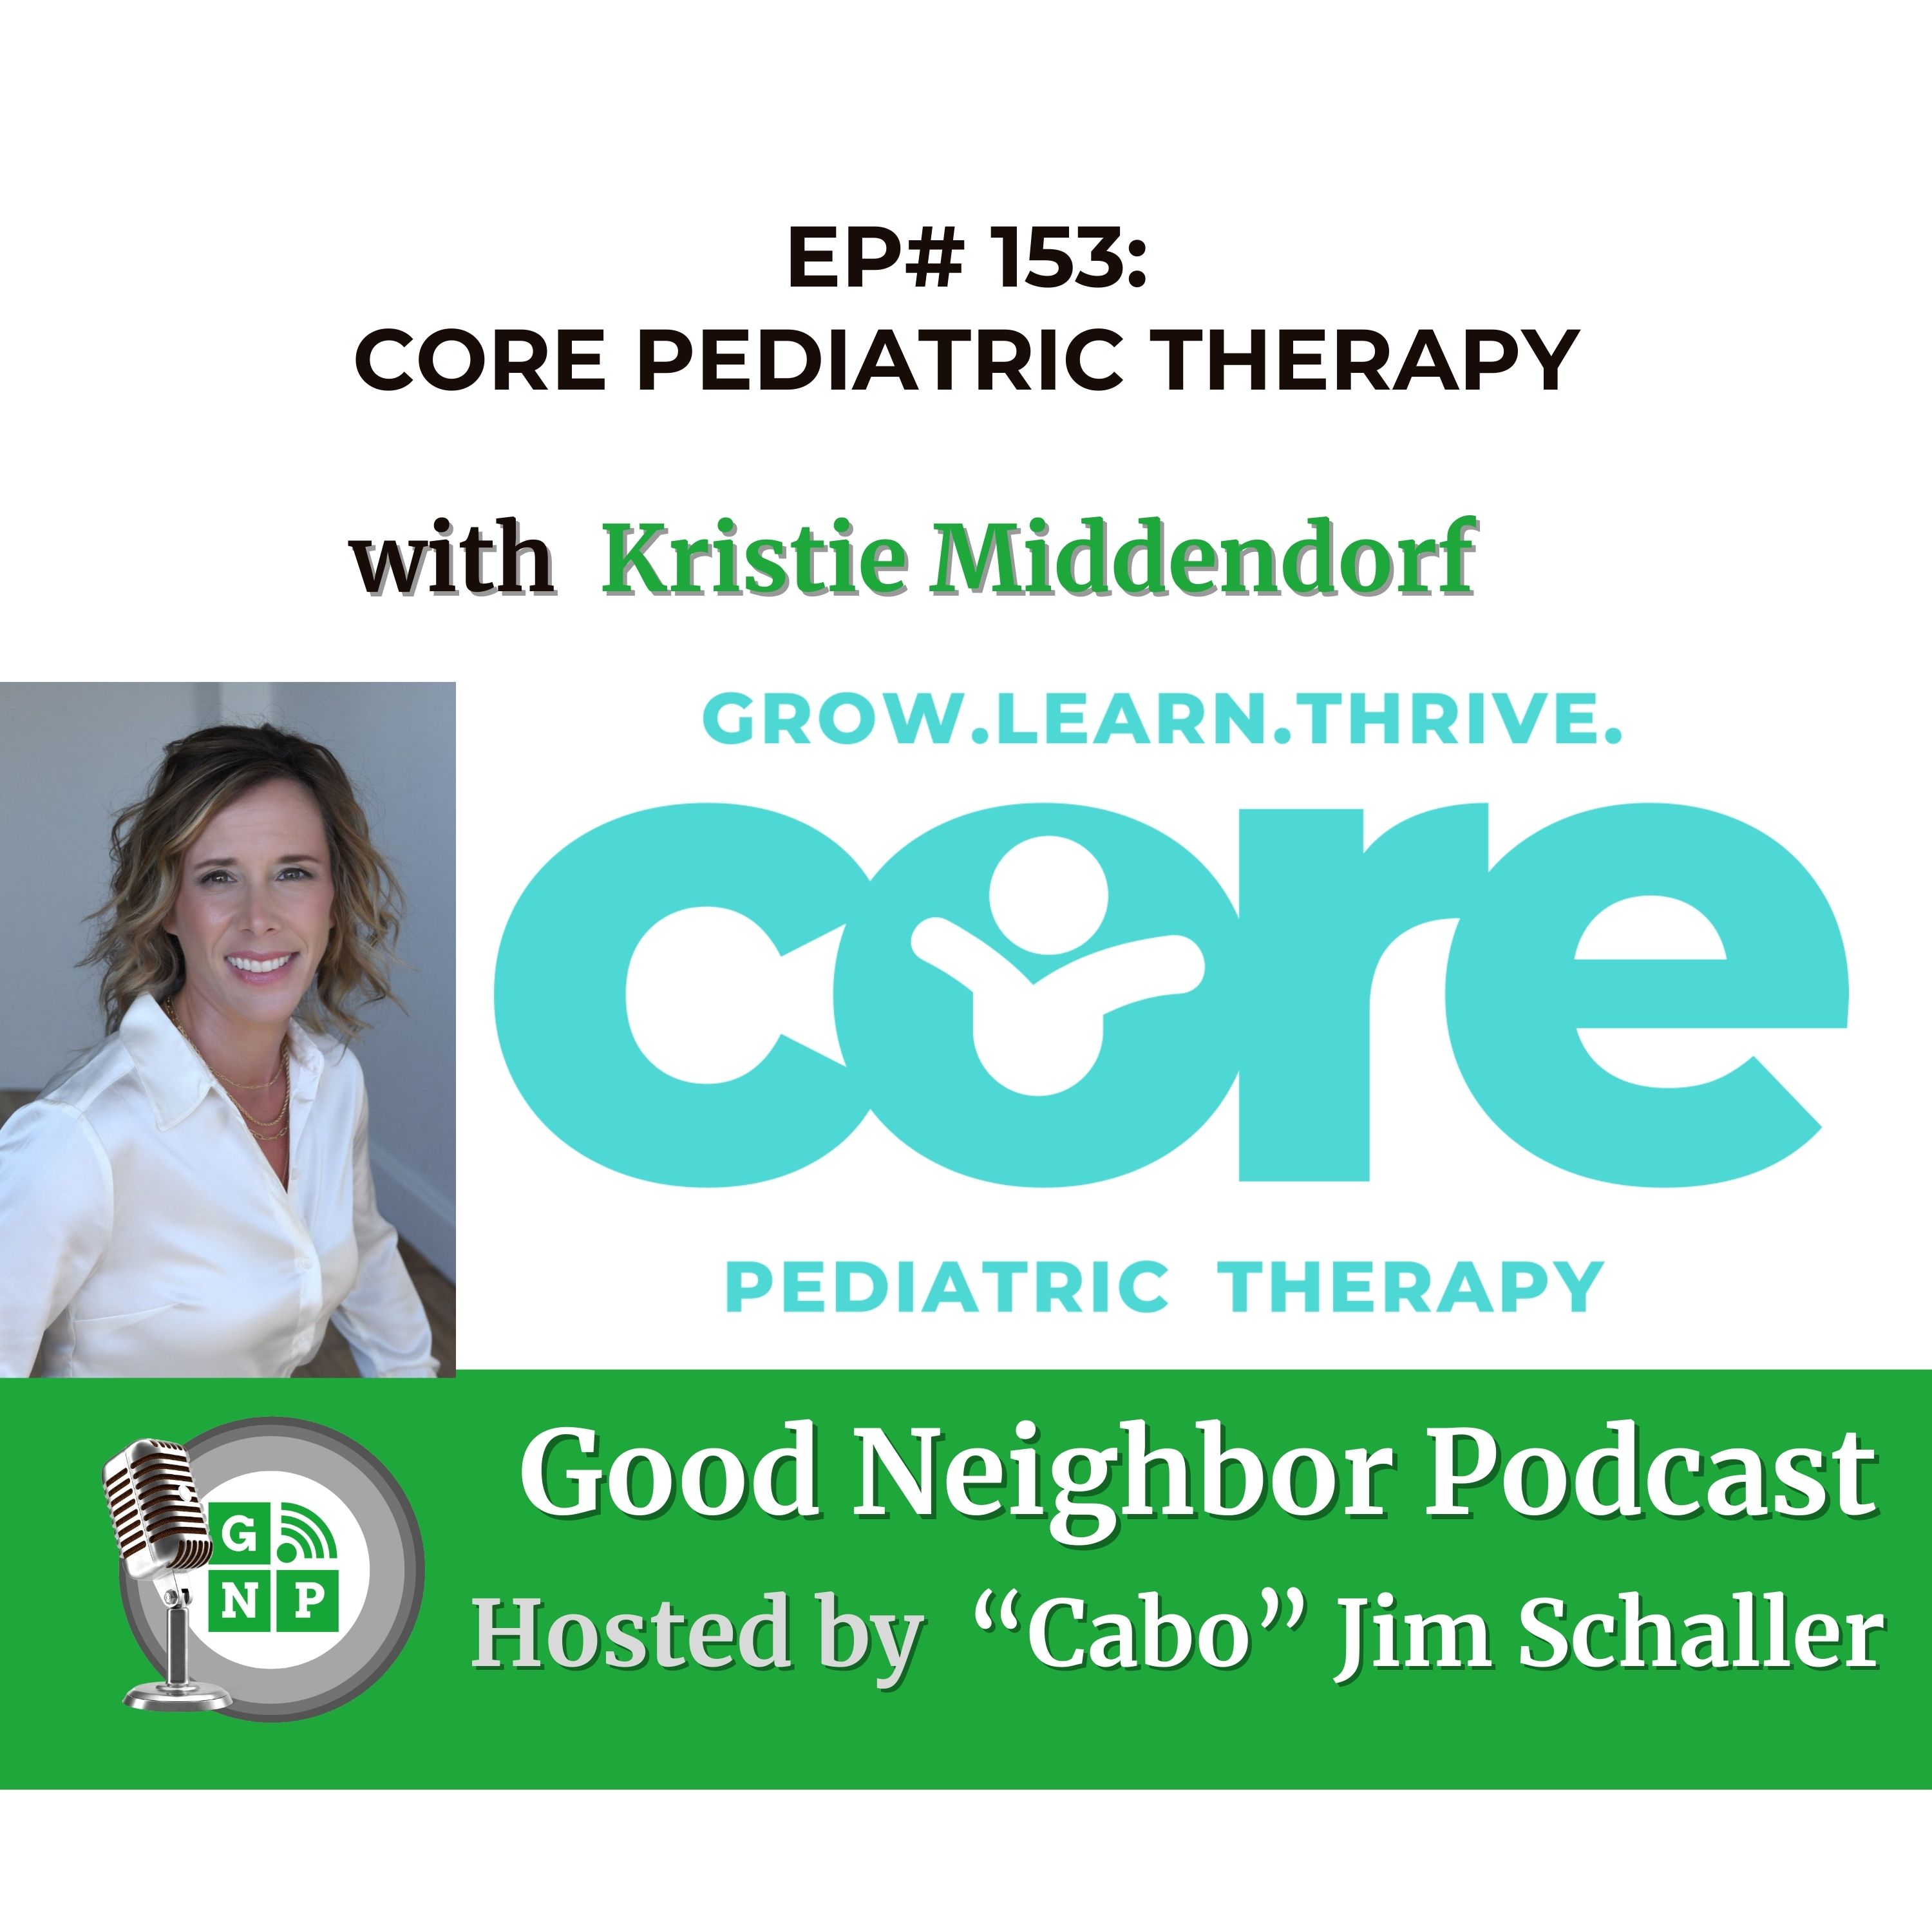 EP# 153 - Kristie Middendorf Shines a Light on Pediatric Therapy Excellence and Community Nurturing